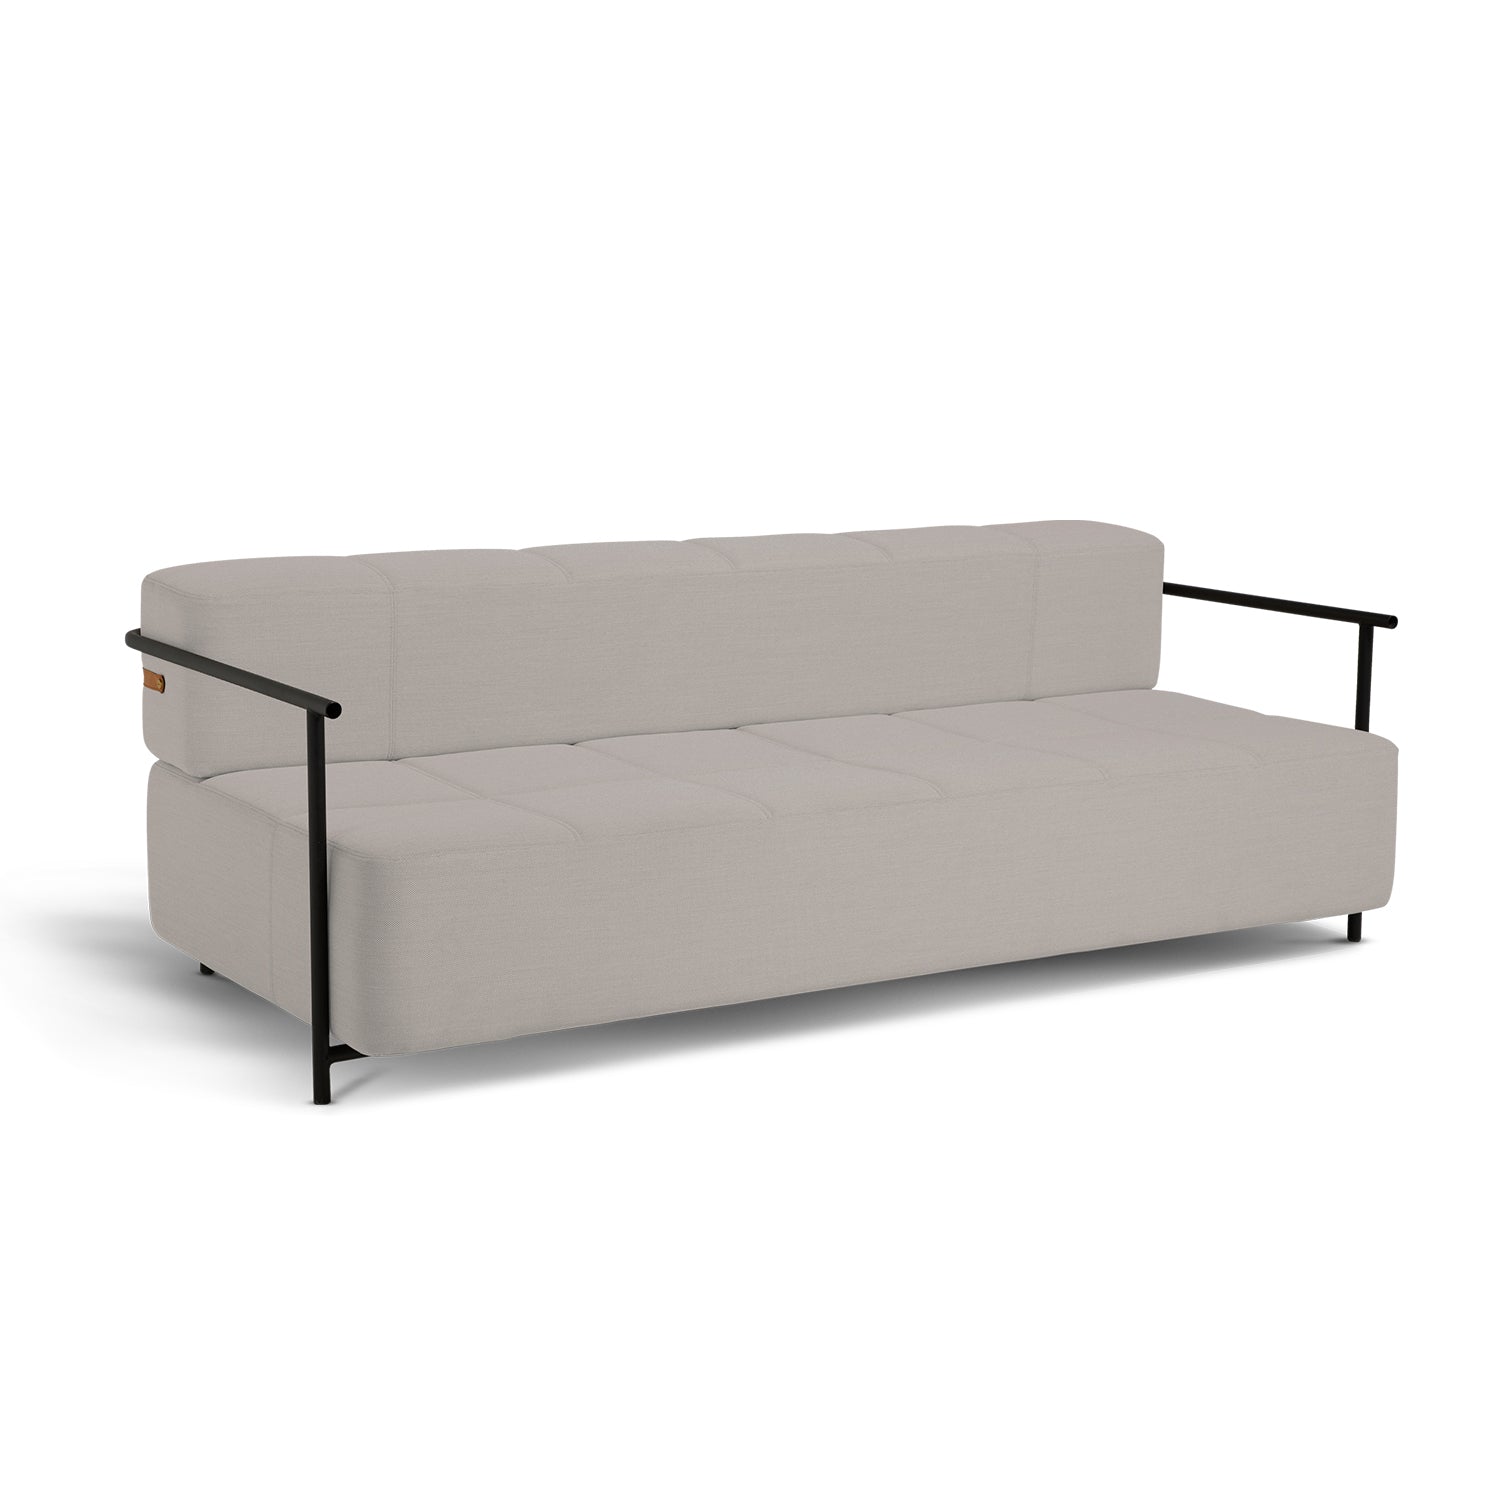 Northern Daybe Sofabed with Armrest in Warm Light Grey